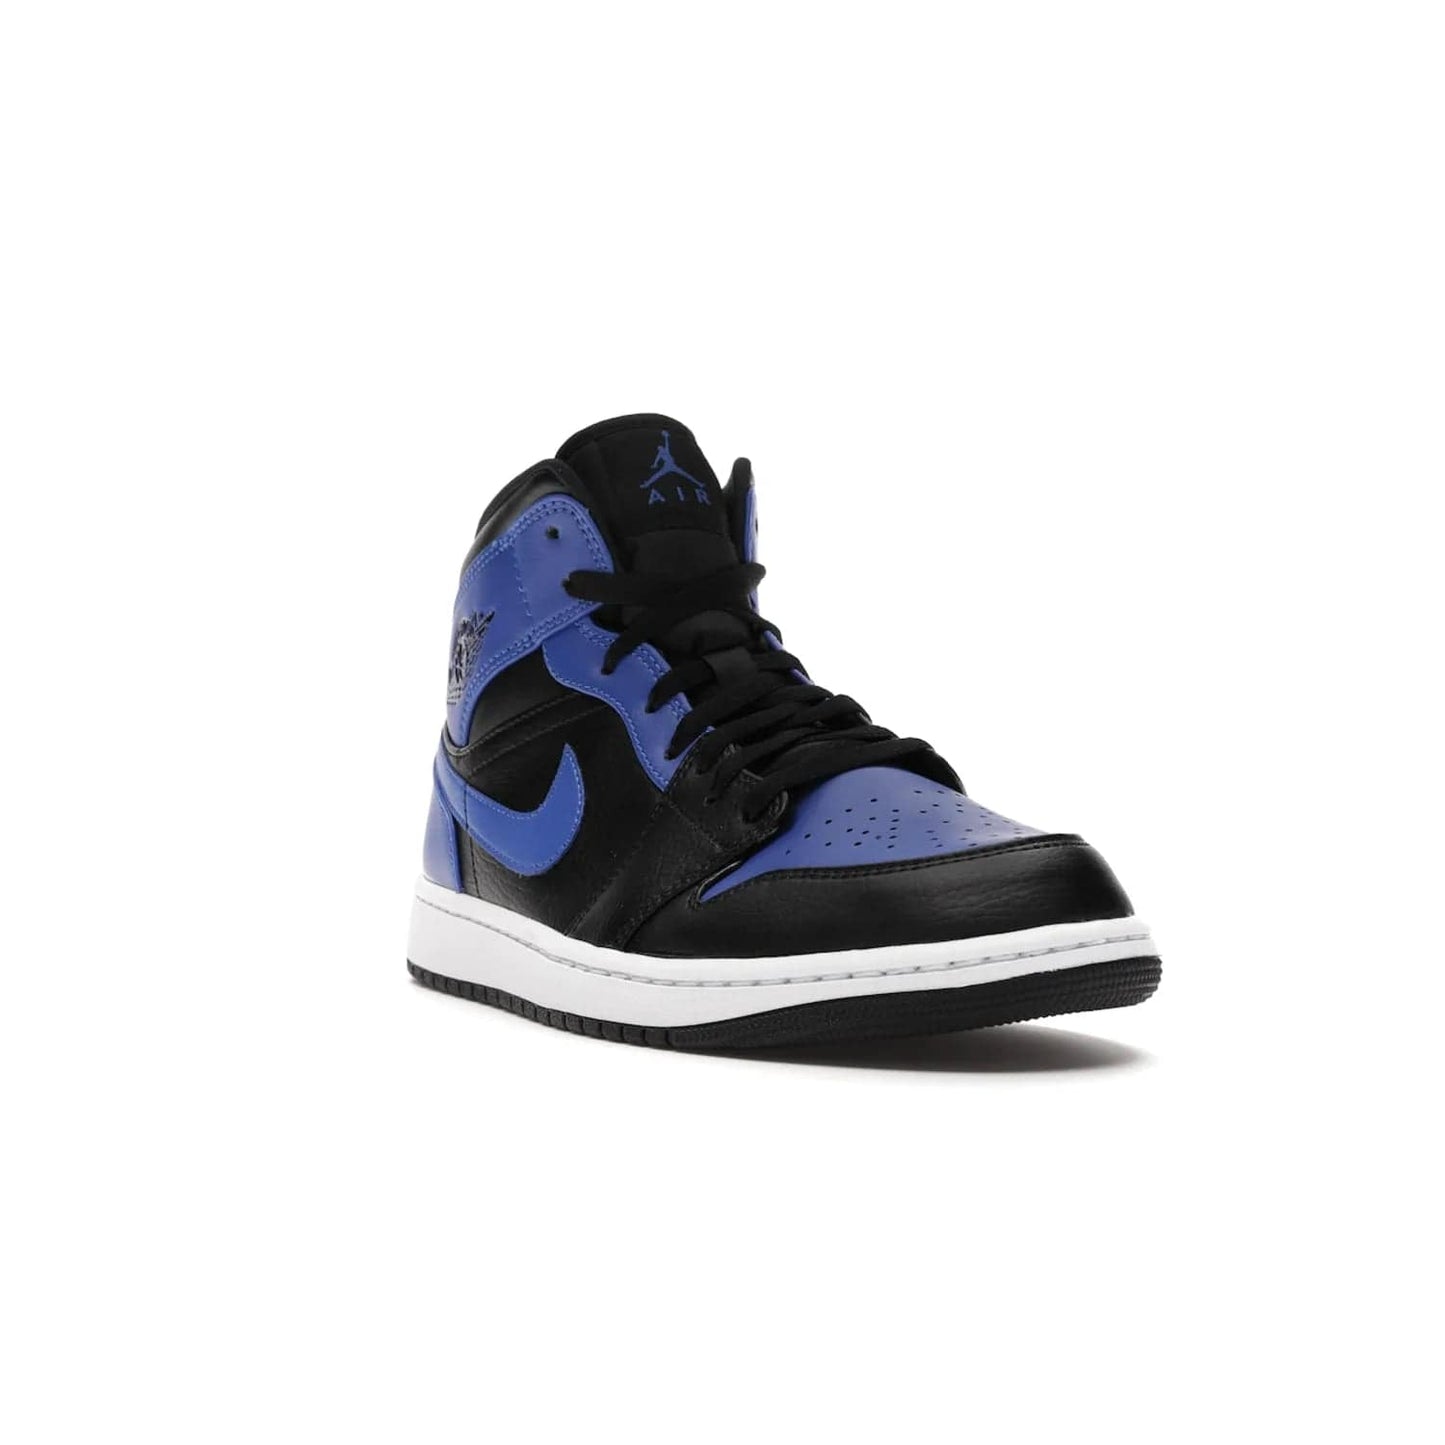 Jordan 1 Mid Hyper Royal Tumbled Leather - Image 7 - Only at www.BallersClubKickz.com - Iconic colorway of the Air Jordan 1 Mid Black Royal Tumbled Leather. Features a black tumbled leather upper, royal blue leather overlays, white midsole & black rubber outsole. Released December 2020. Adds premium style to any collection.